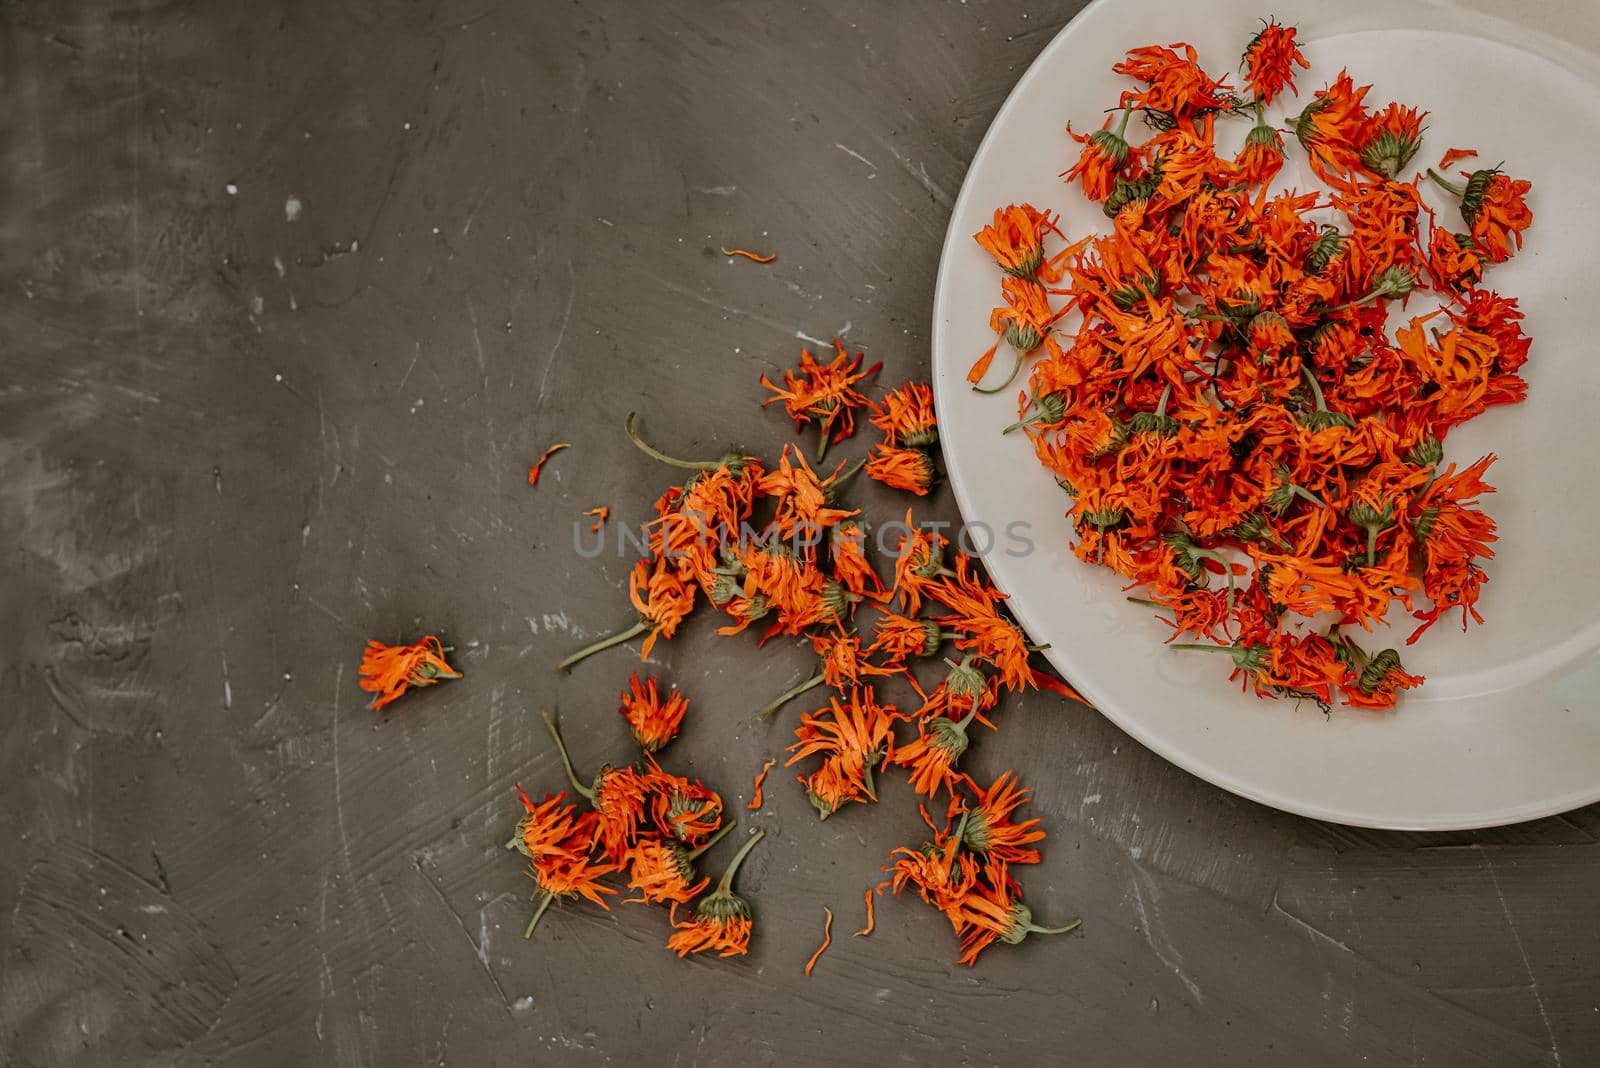 Dried flowers in a gray plate. Medicinal herbal dried plants marigold, orange calendula. Neutral white and gray background.